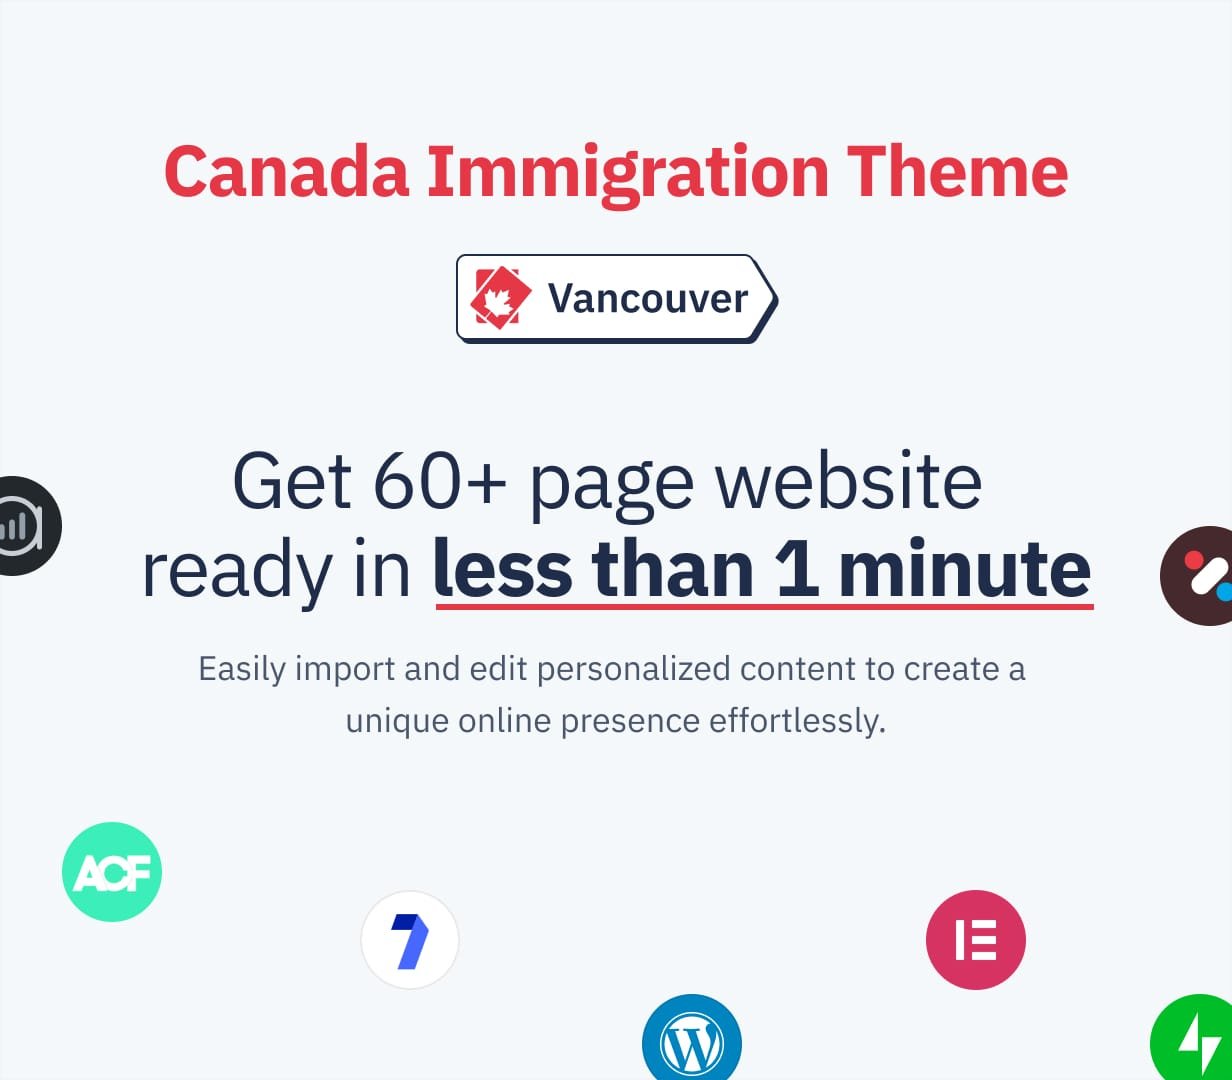 Get your site ready in less than 1 minute